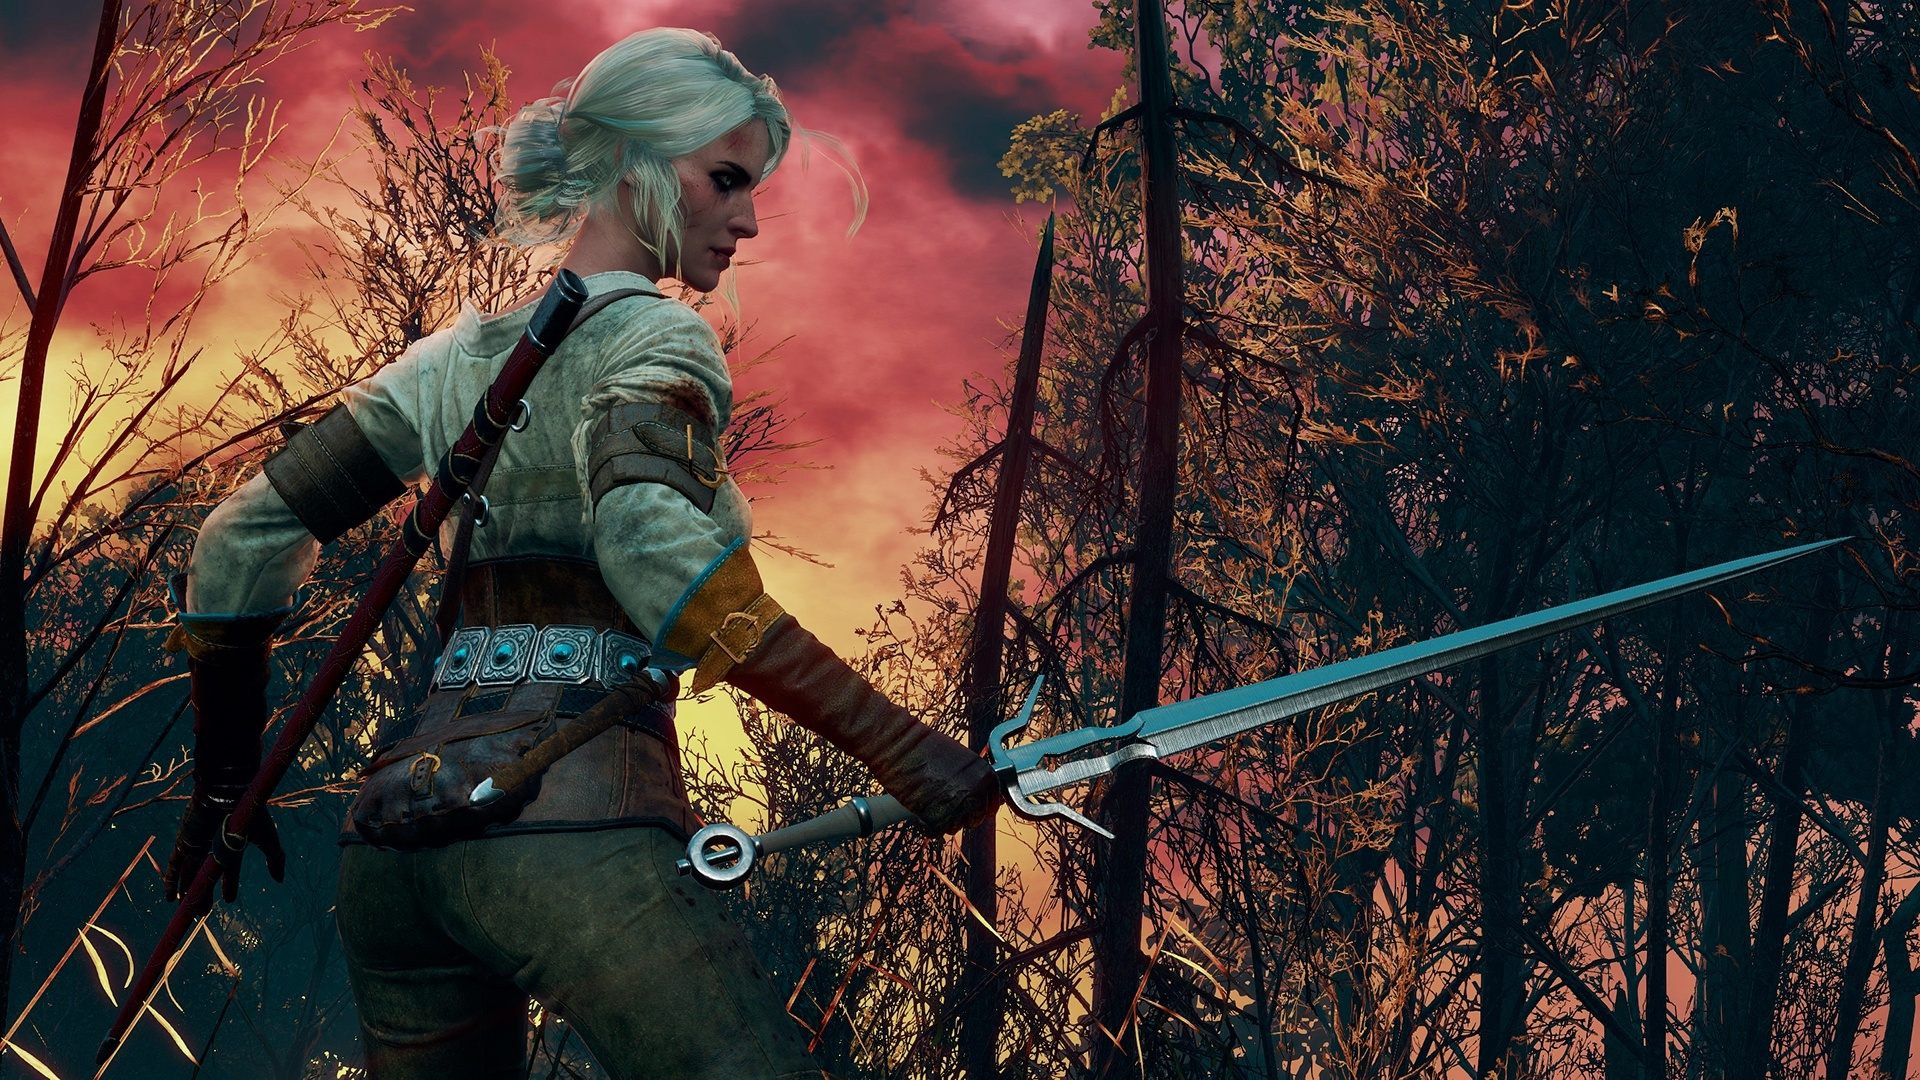 Hd Witcher 3 4k Images For Android - Ciri - HD Wallpaper 